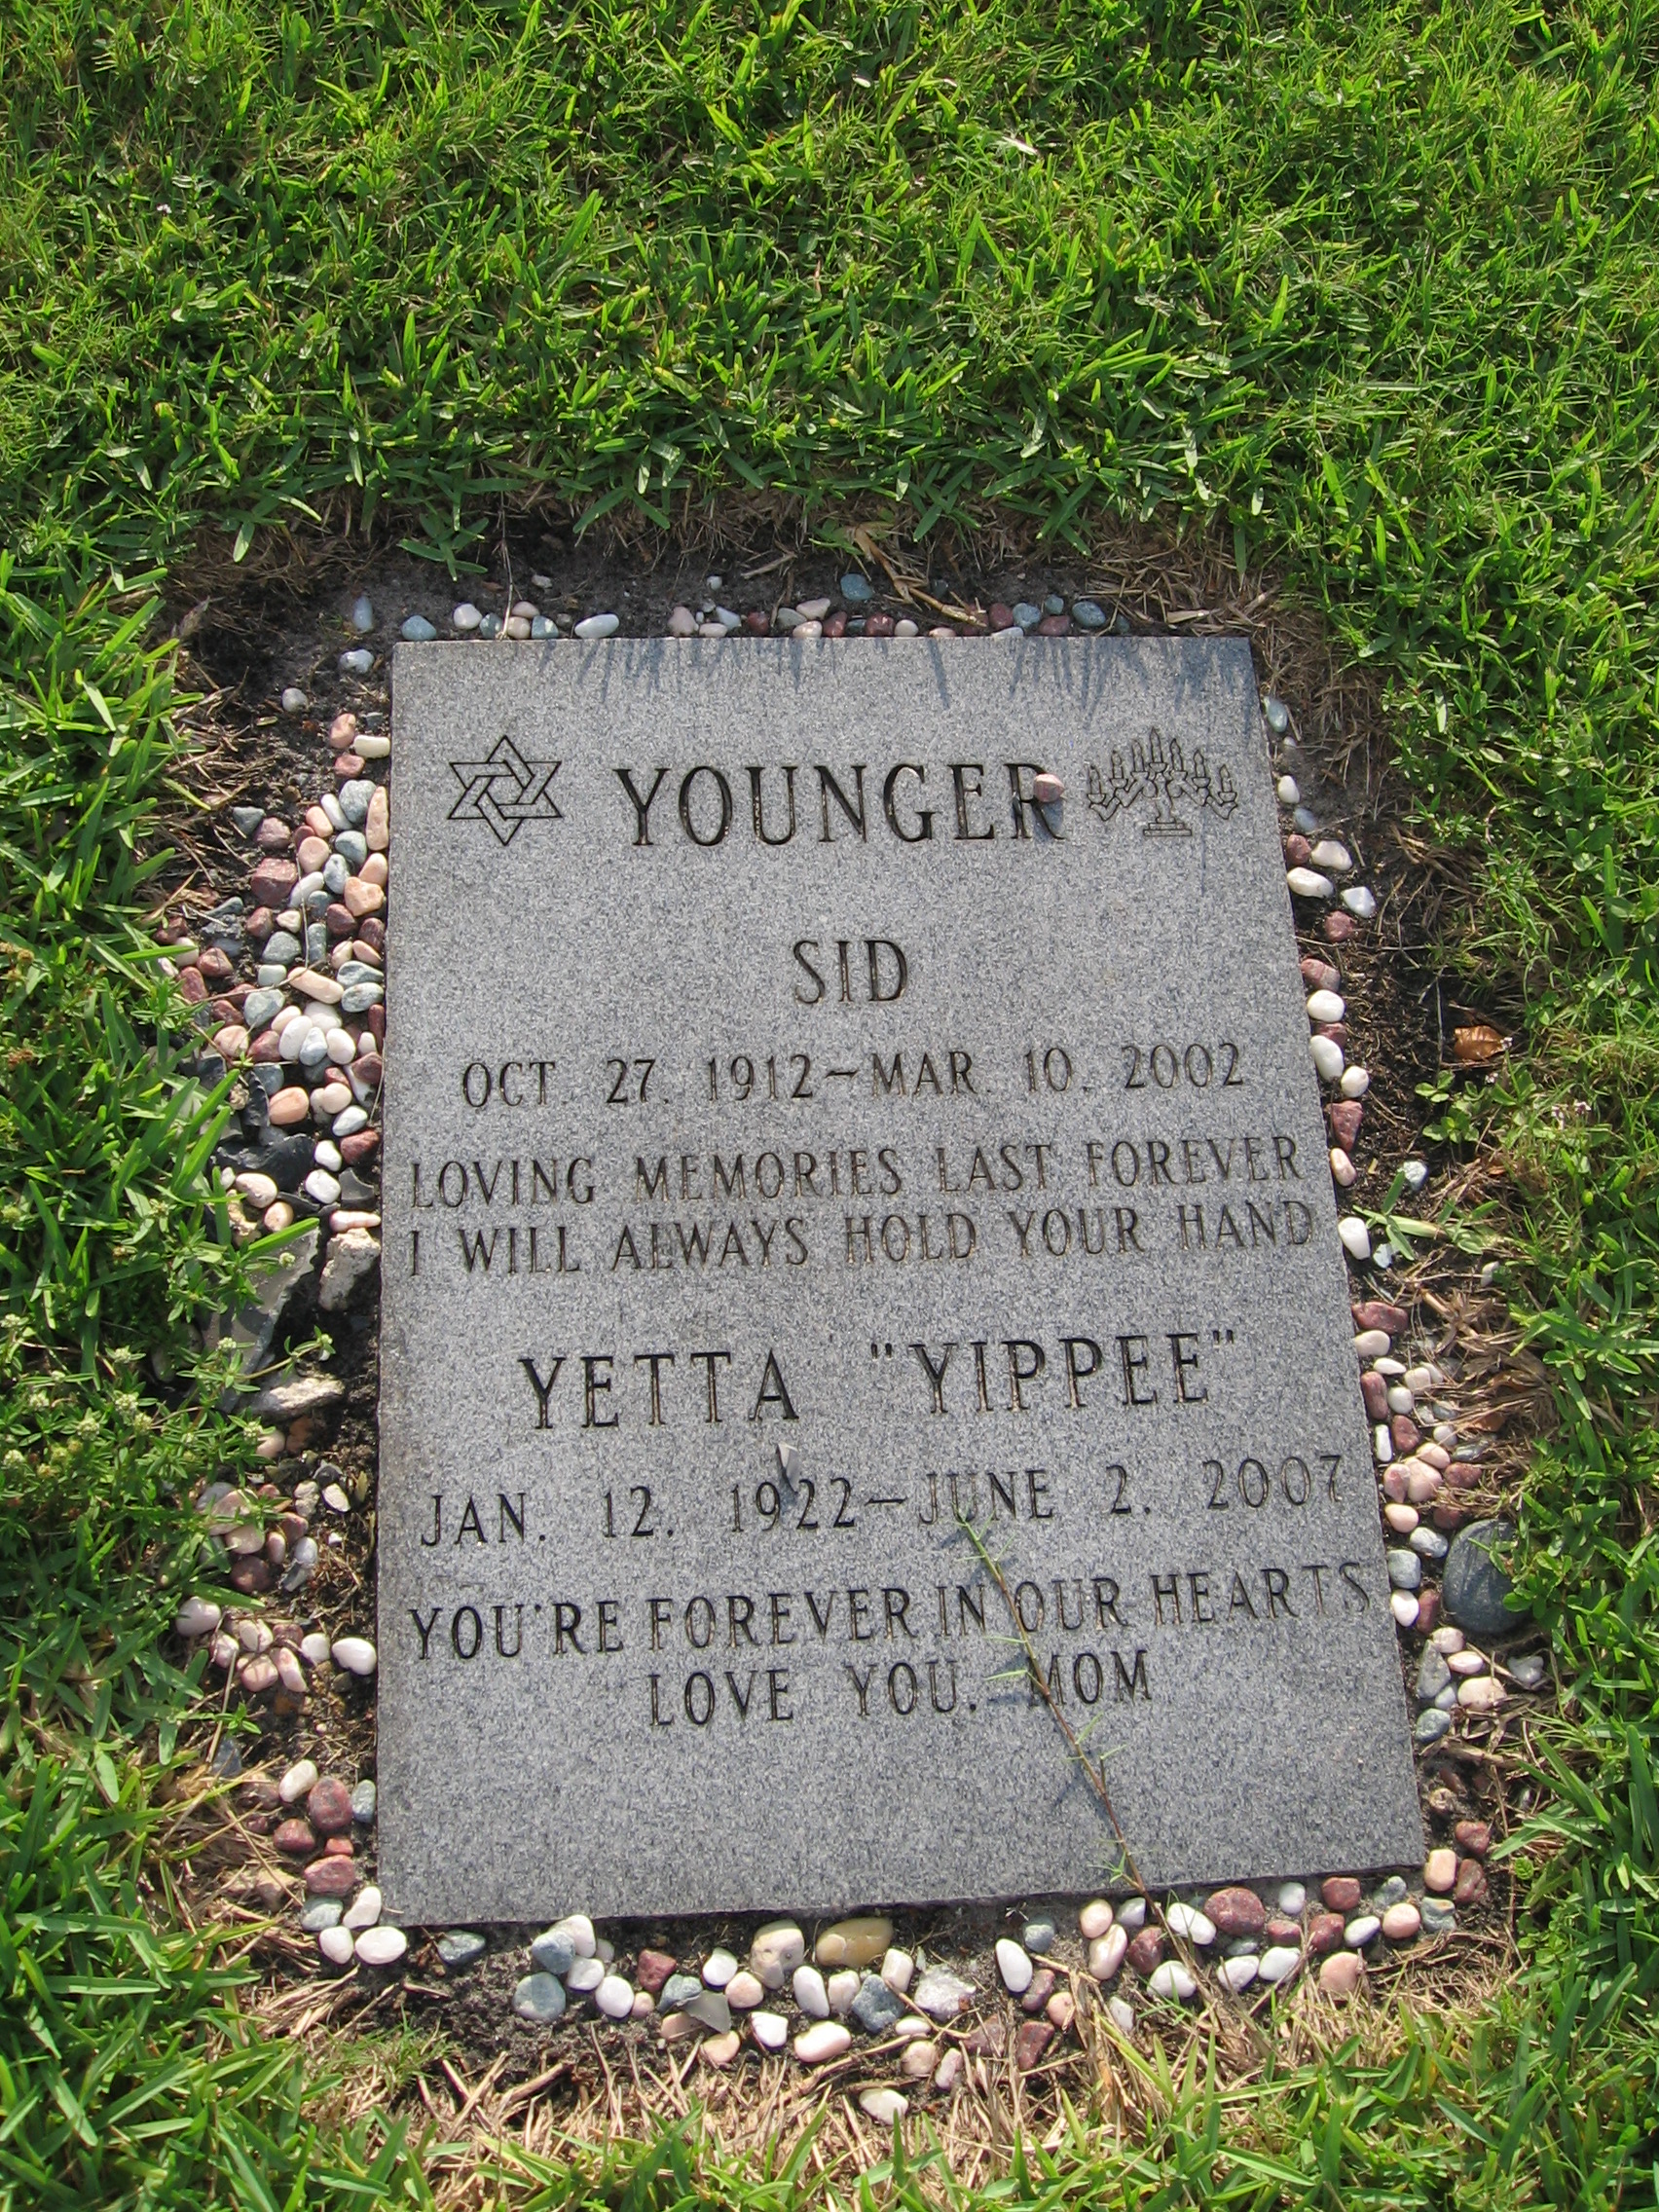 Yetta "Yippee" Younger